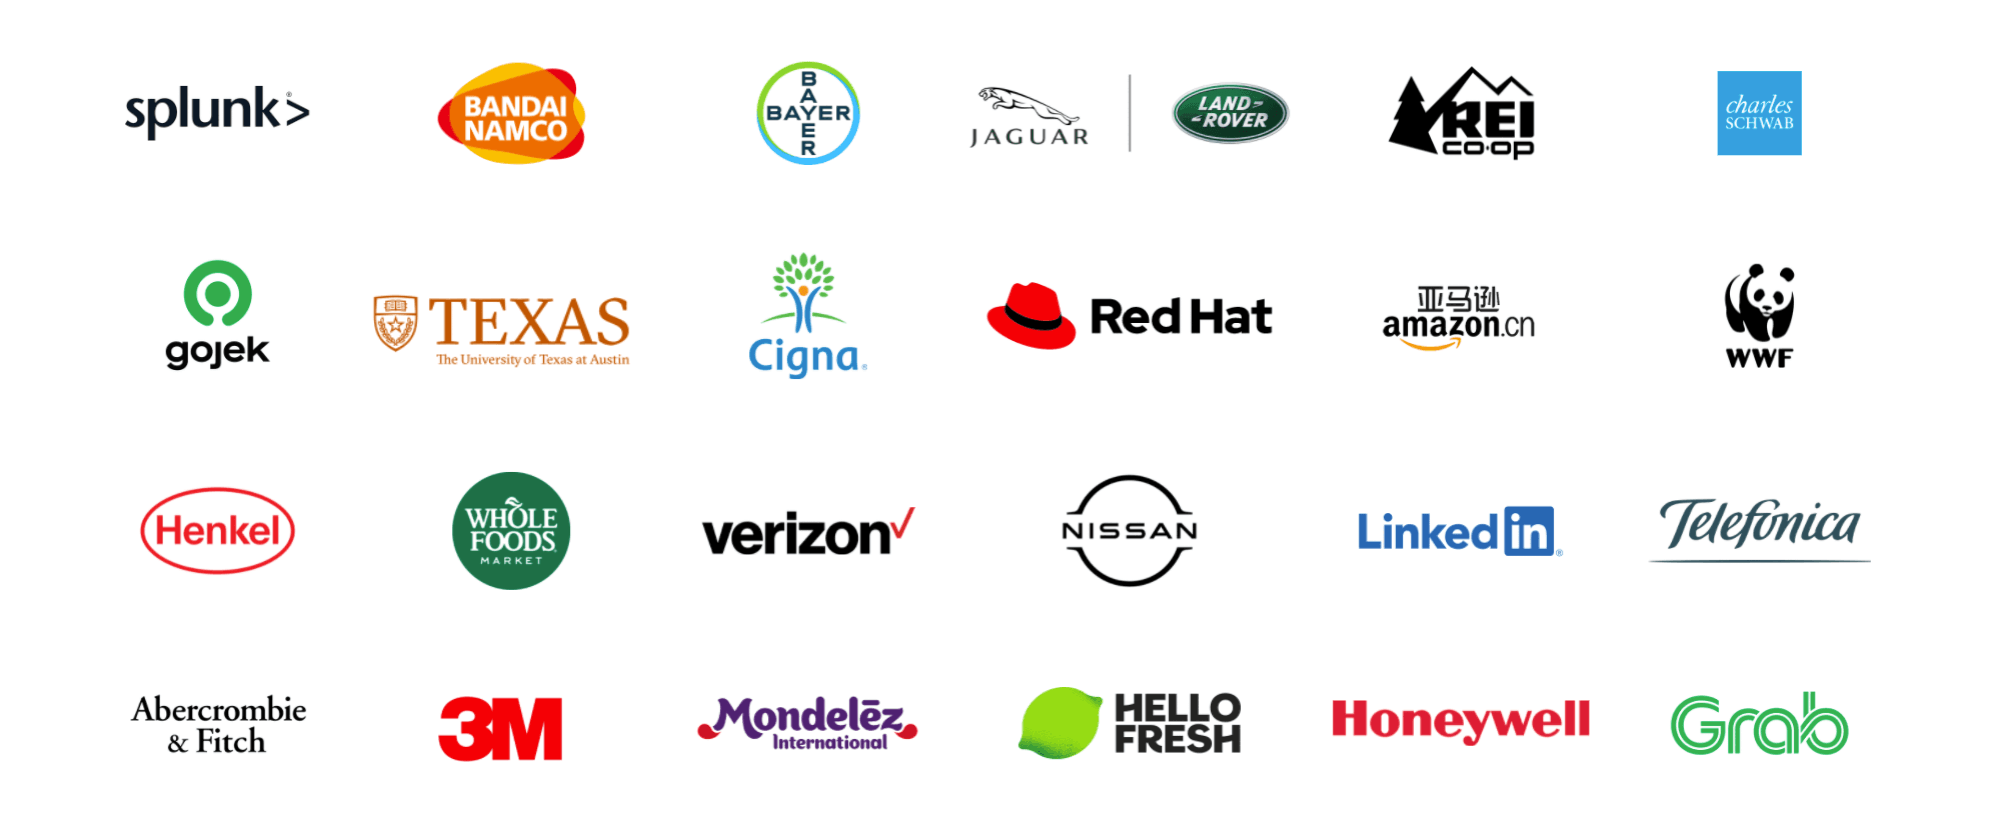 Logos of Tableau customers worldwide and across various industries, including Jaguar LandRover, Charles Schwab, University of Texas at Austin, Red Hat, Amazon.cn, Verizon, LinkedIn, Modelez International, Honeywell, Grab, and many others